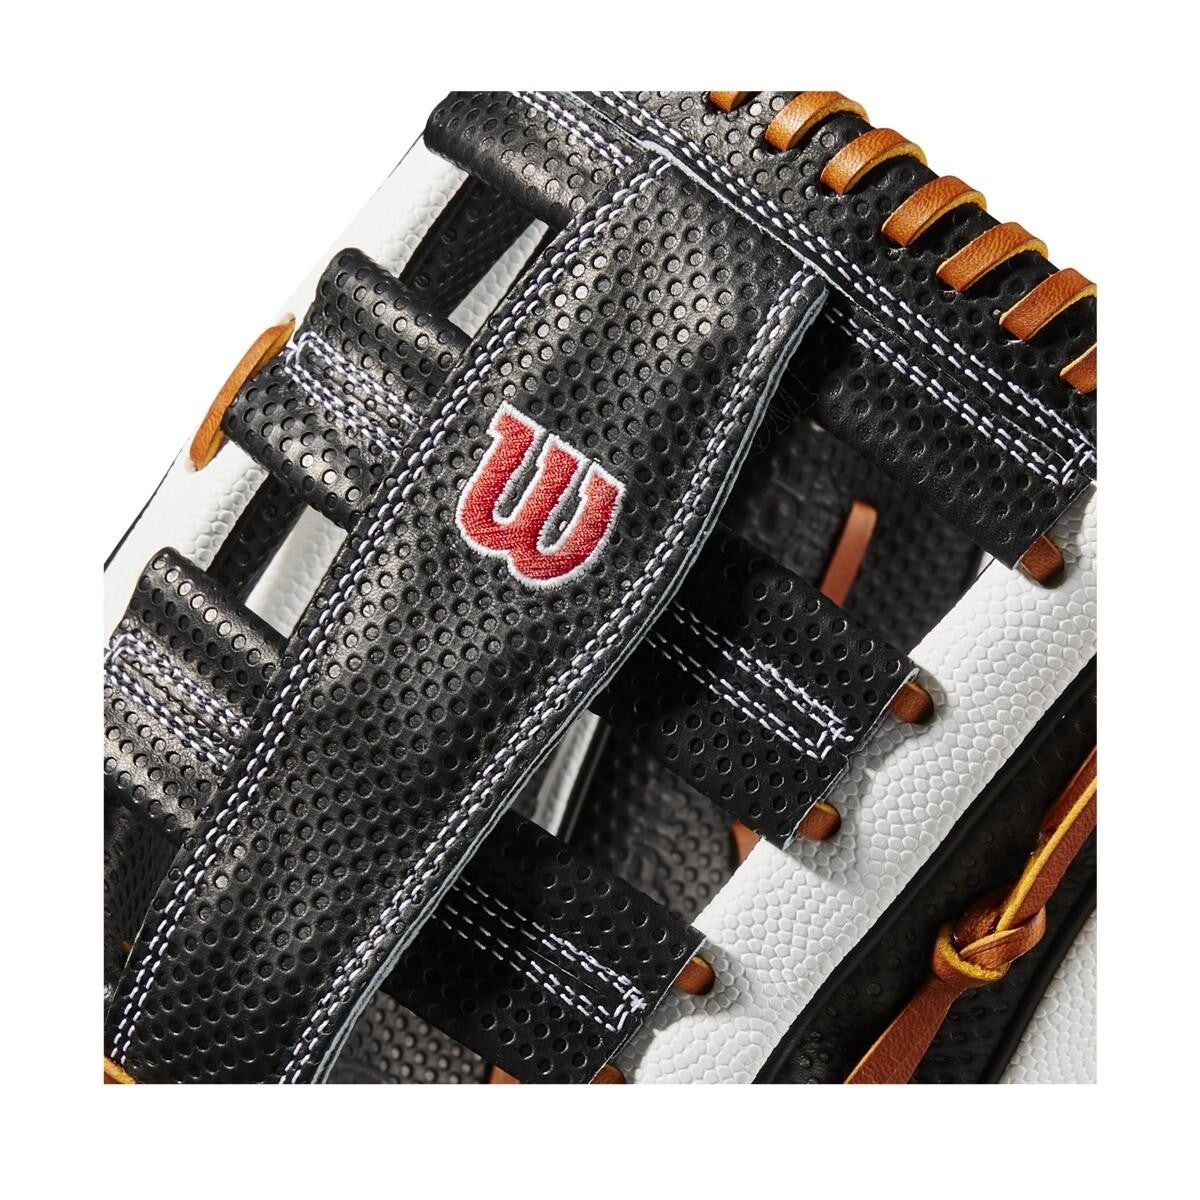 2021 A2K SC1775SS 12.75" Outfield Baseball Glove - Limited Edition ● Wilson Promotions - -5